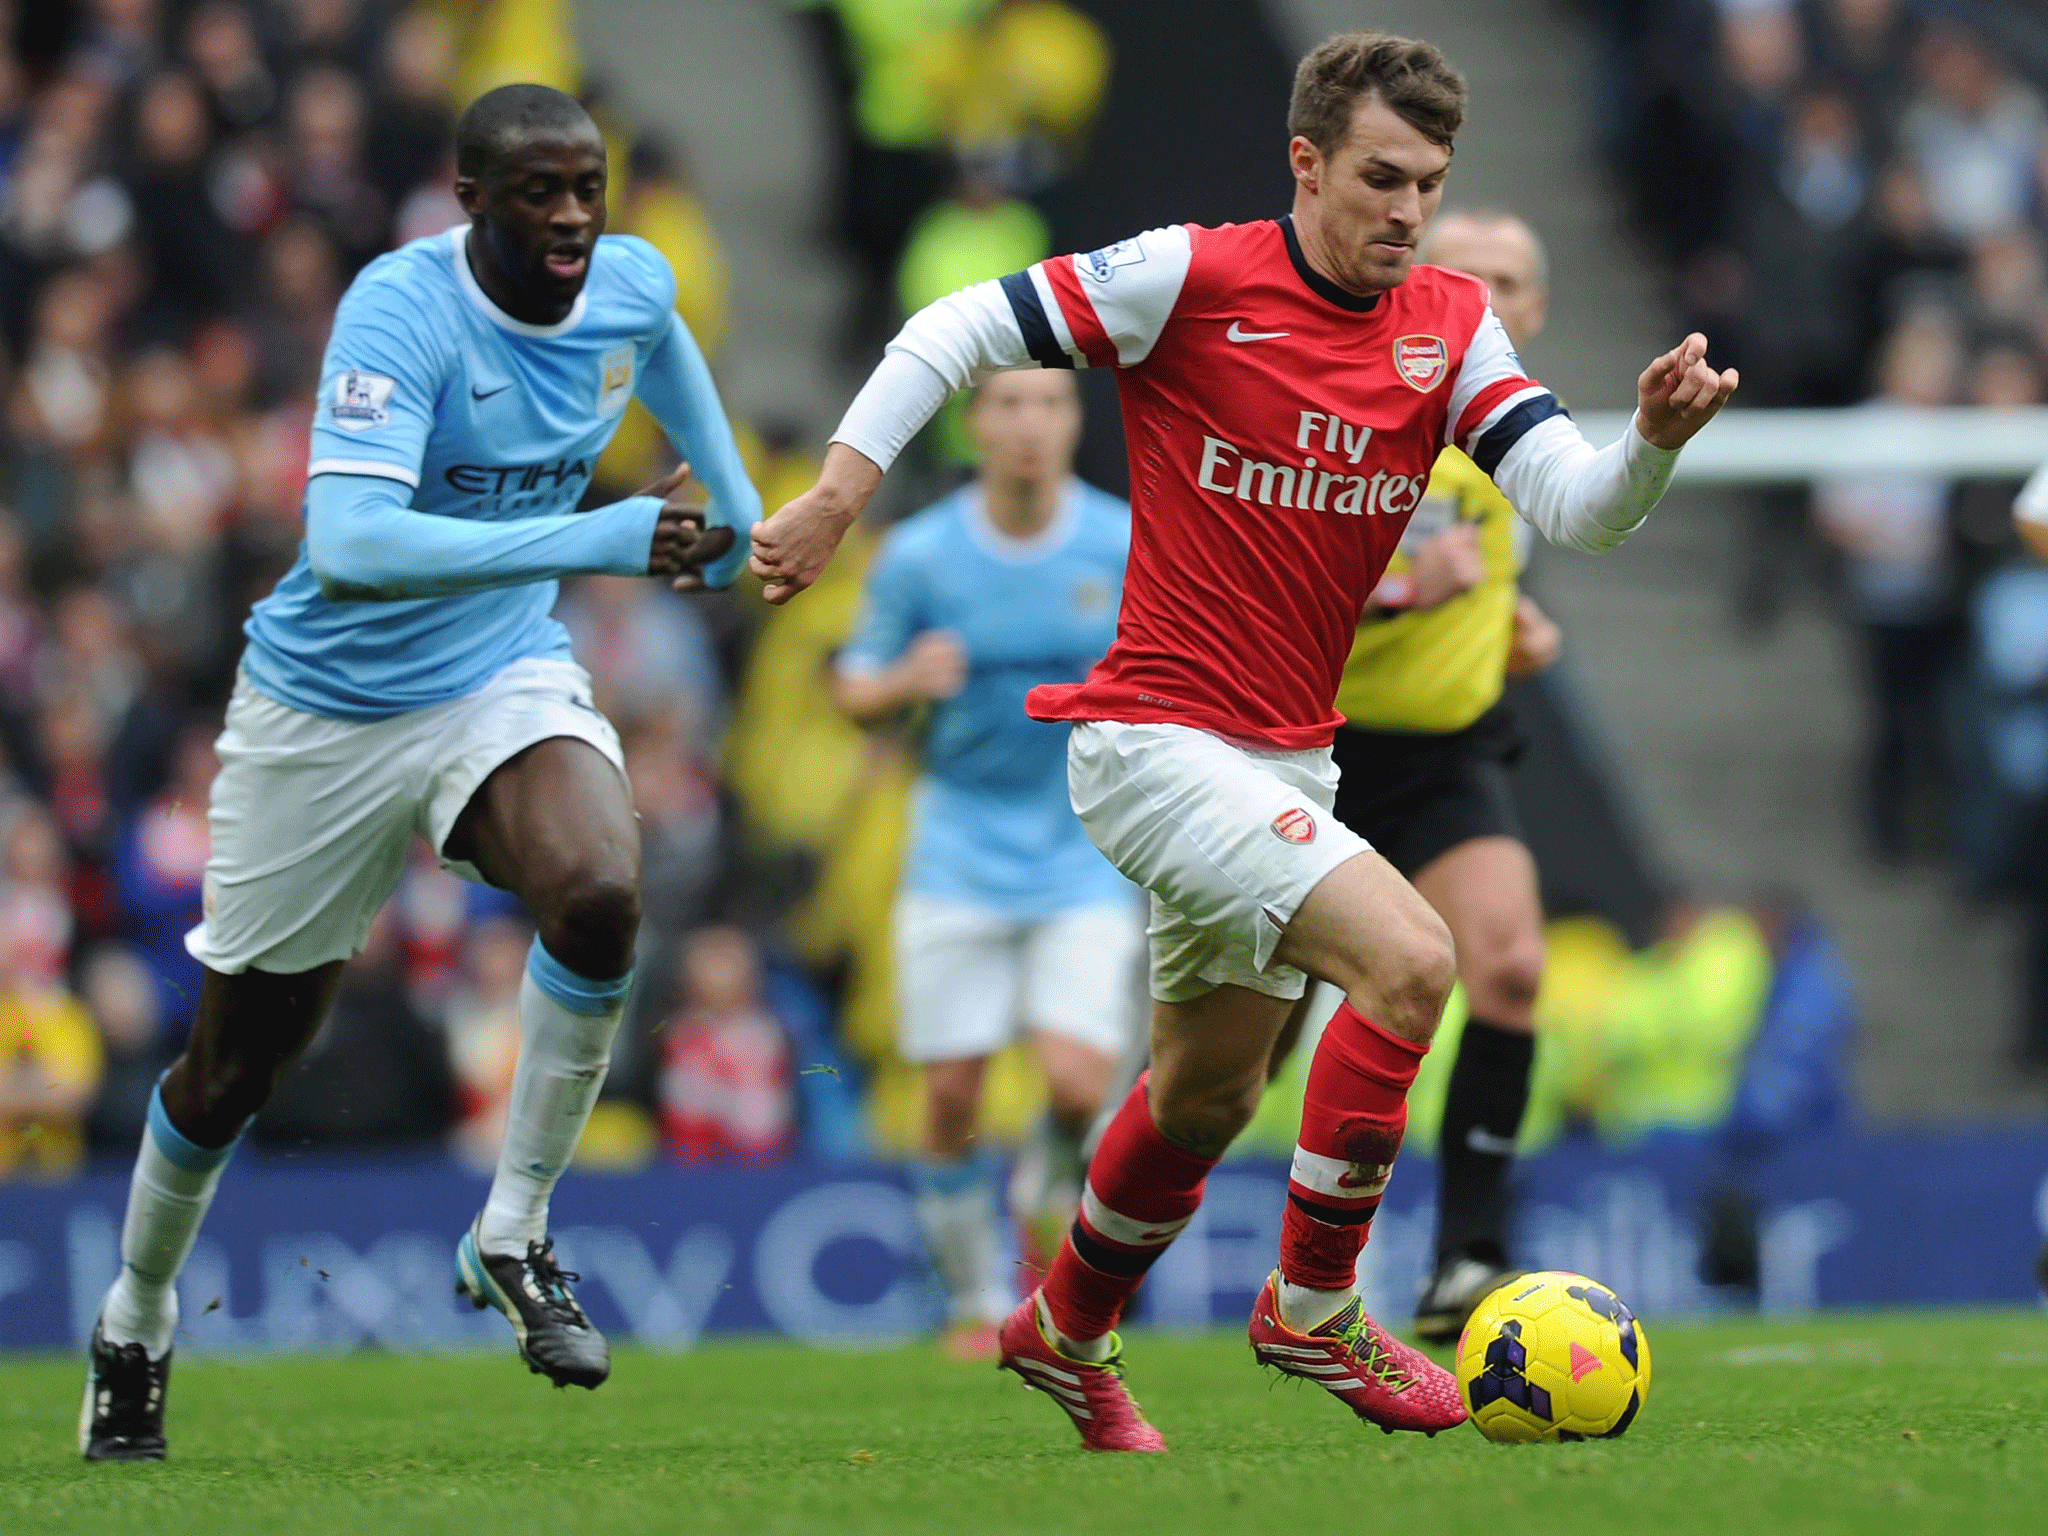 Arsenal midfielder Aaron Ramsey in action against Manchester City